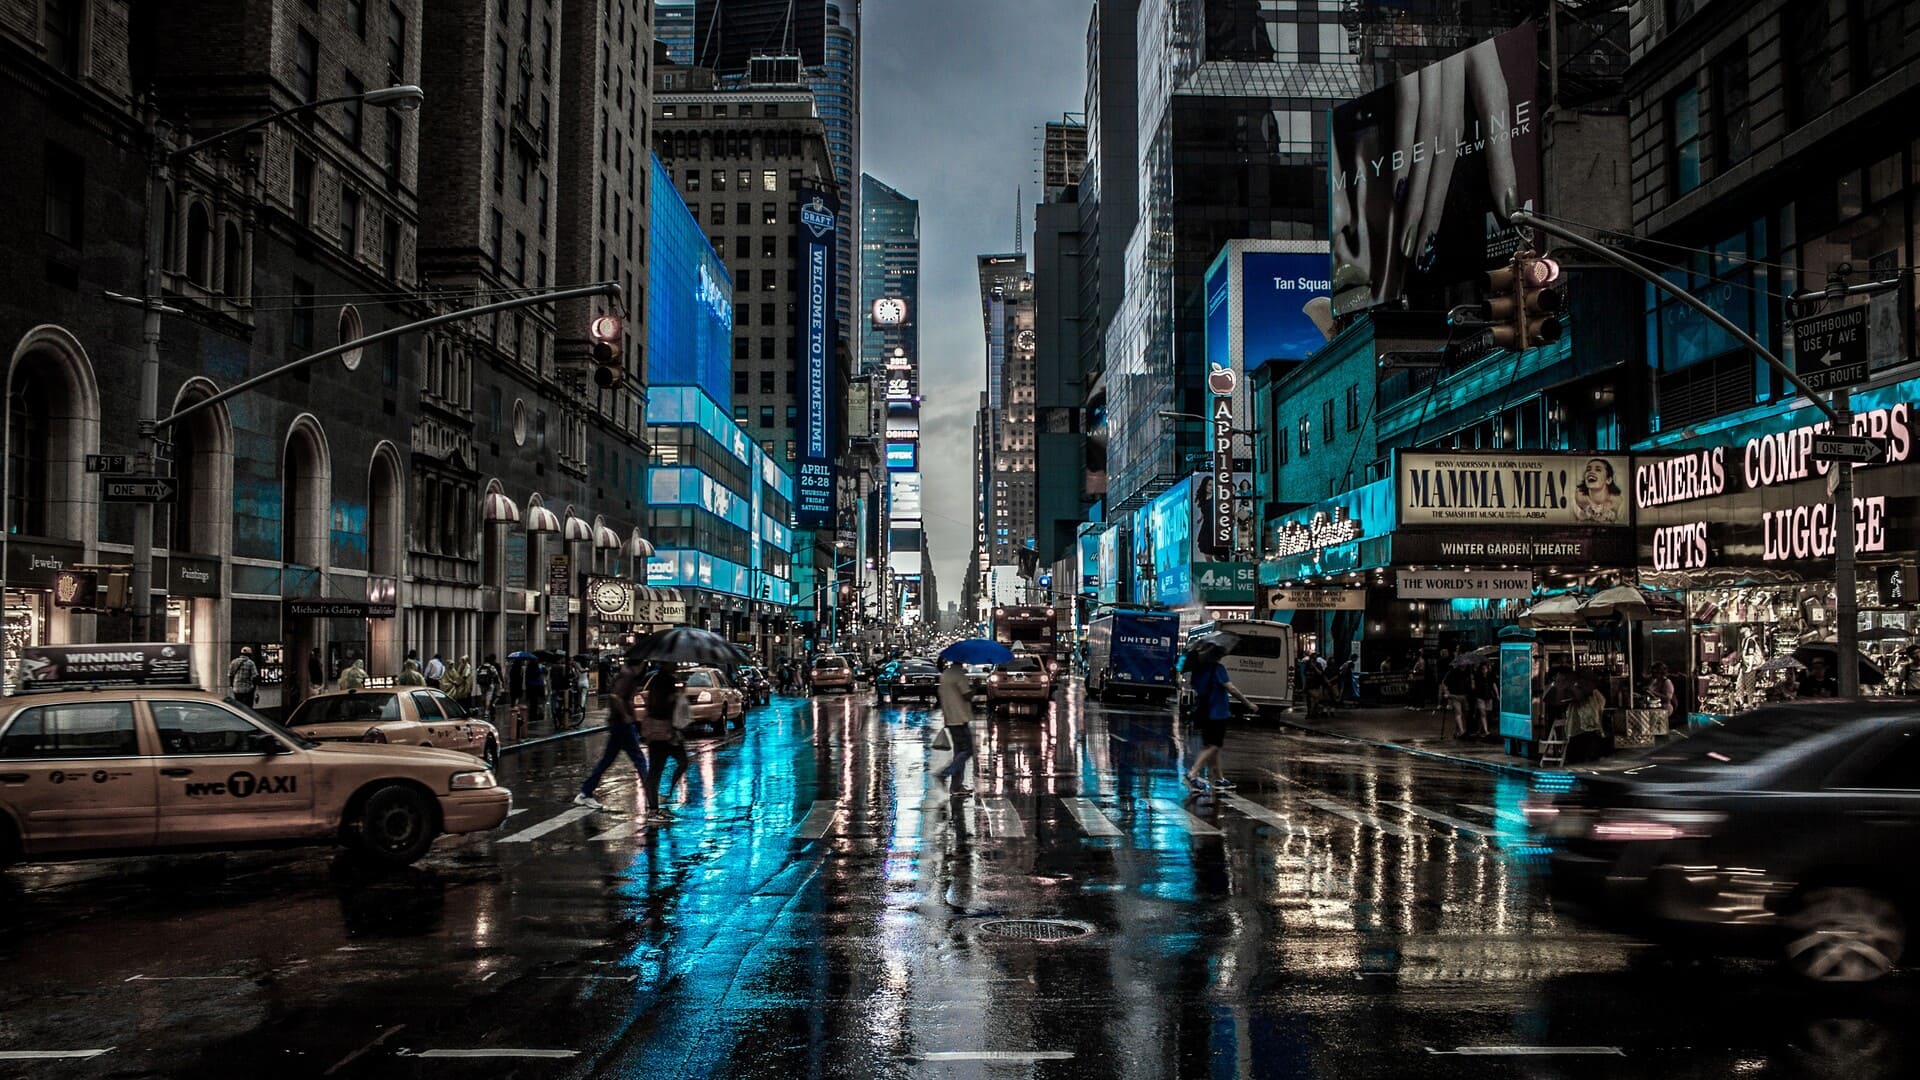 The rain is falling in the city wallpaper 1920x1080 - New York